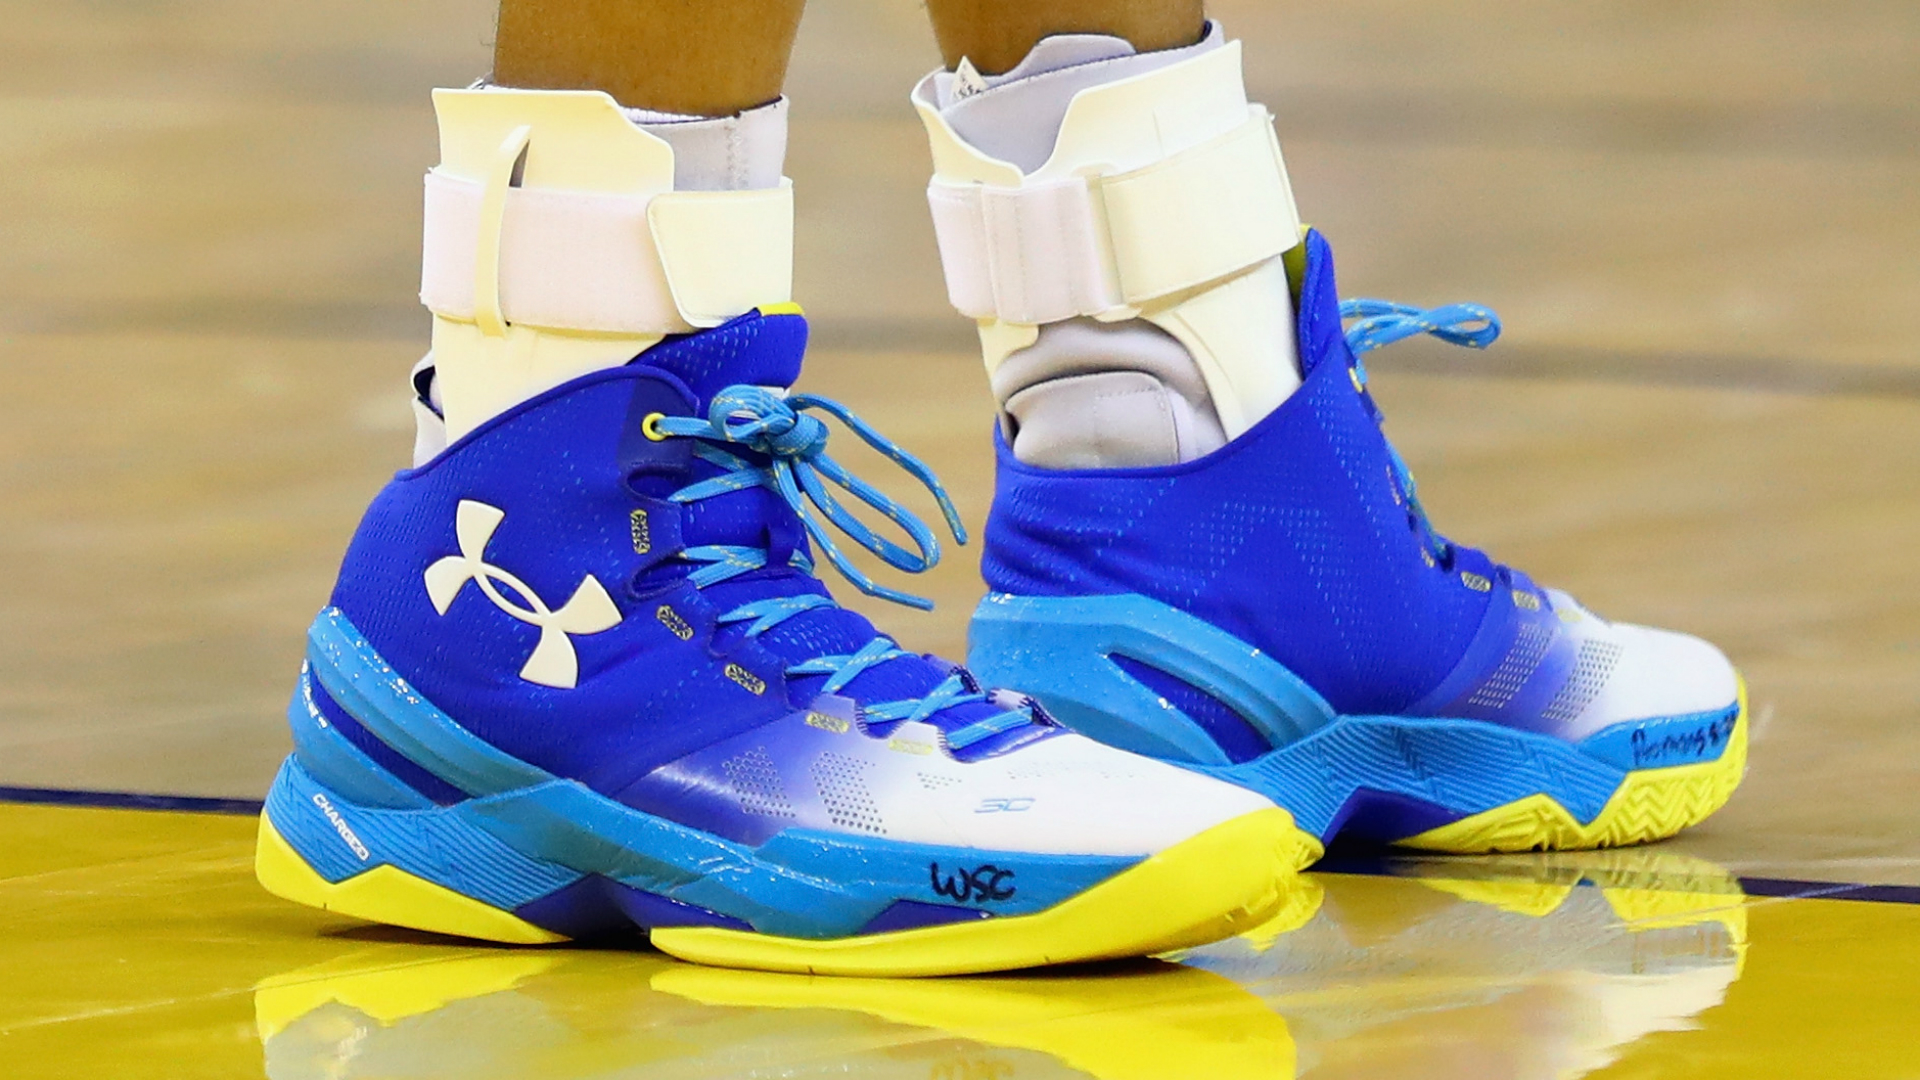 steph curry bible shoes